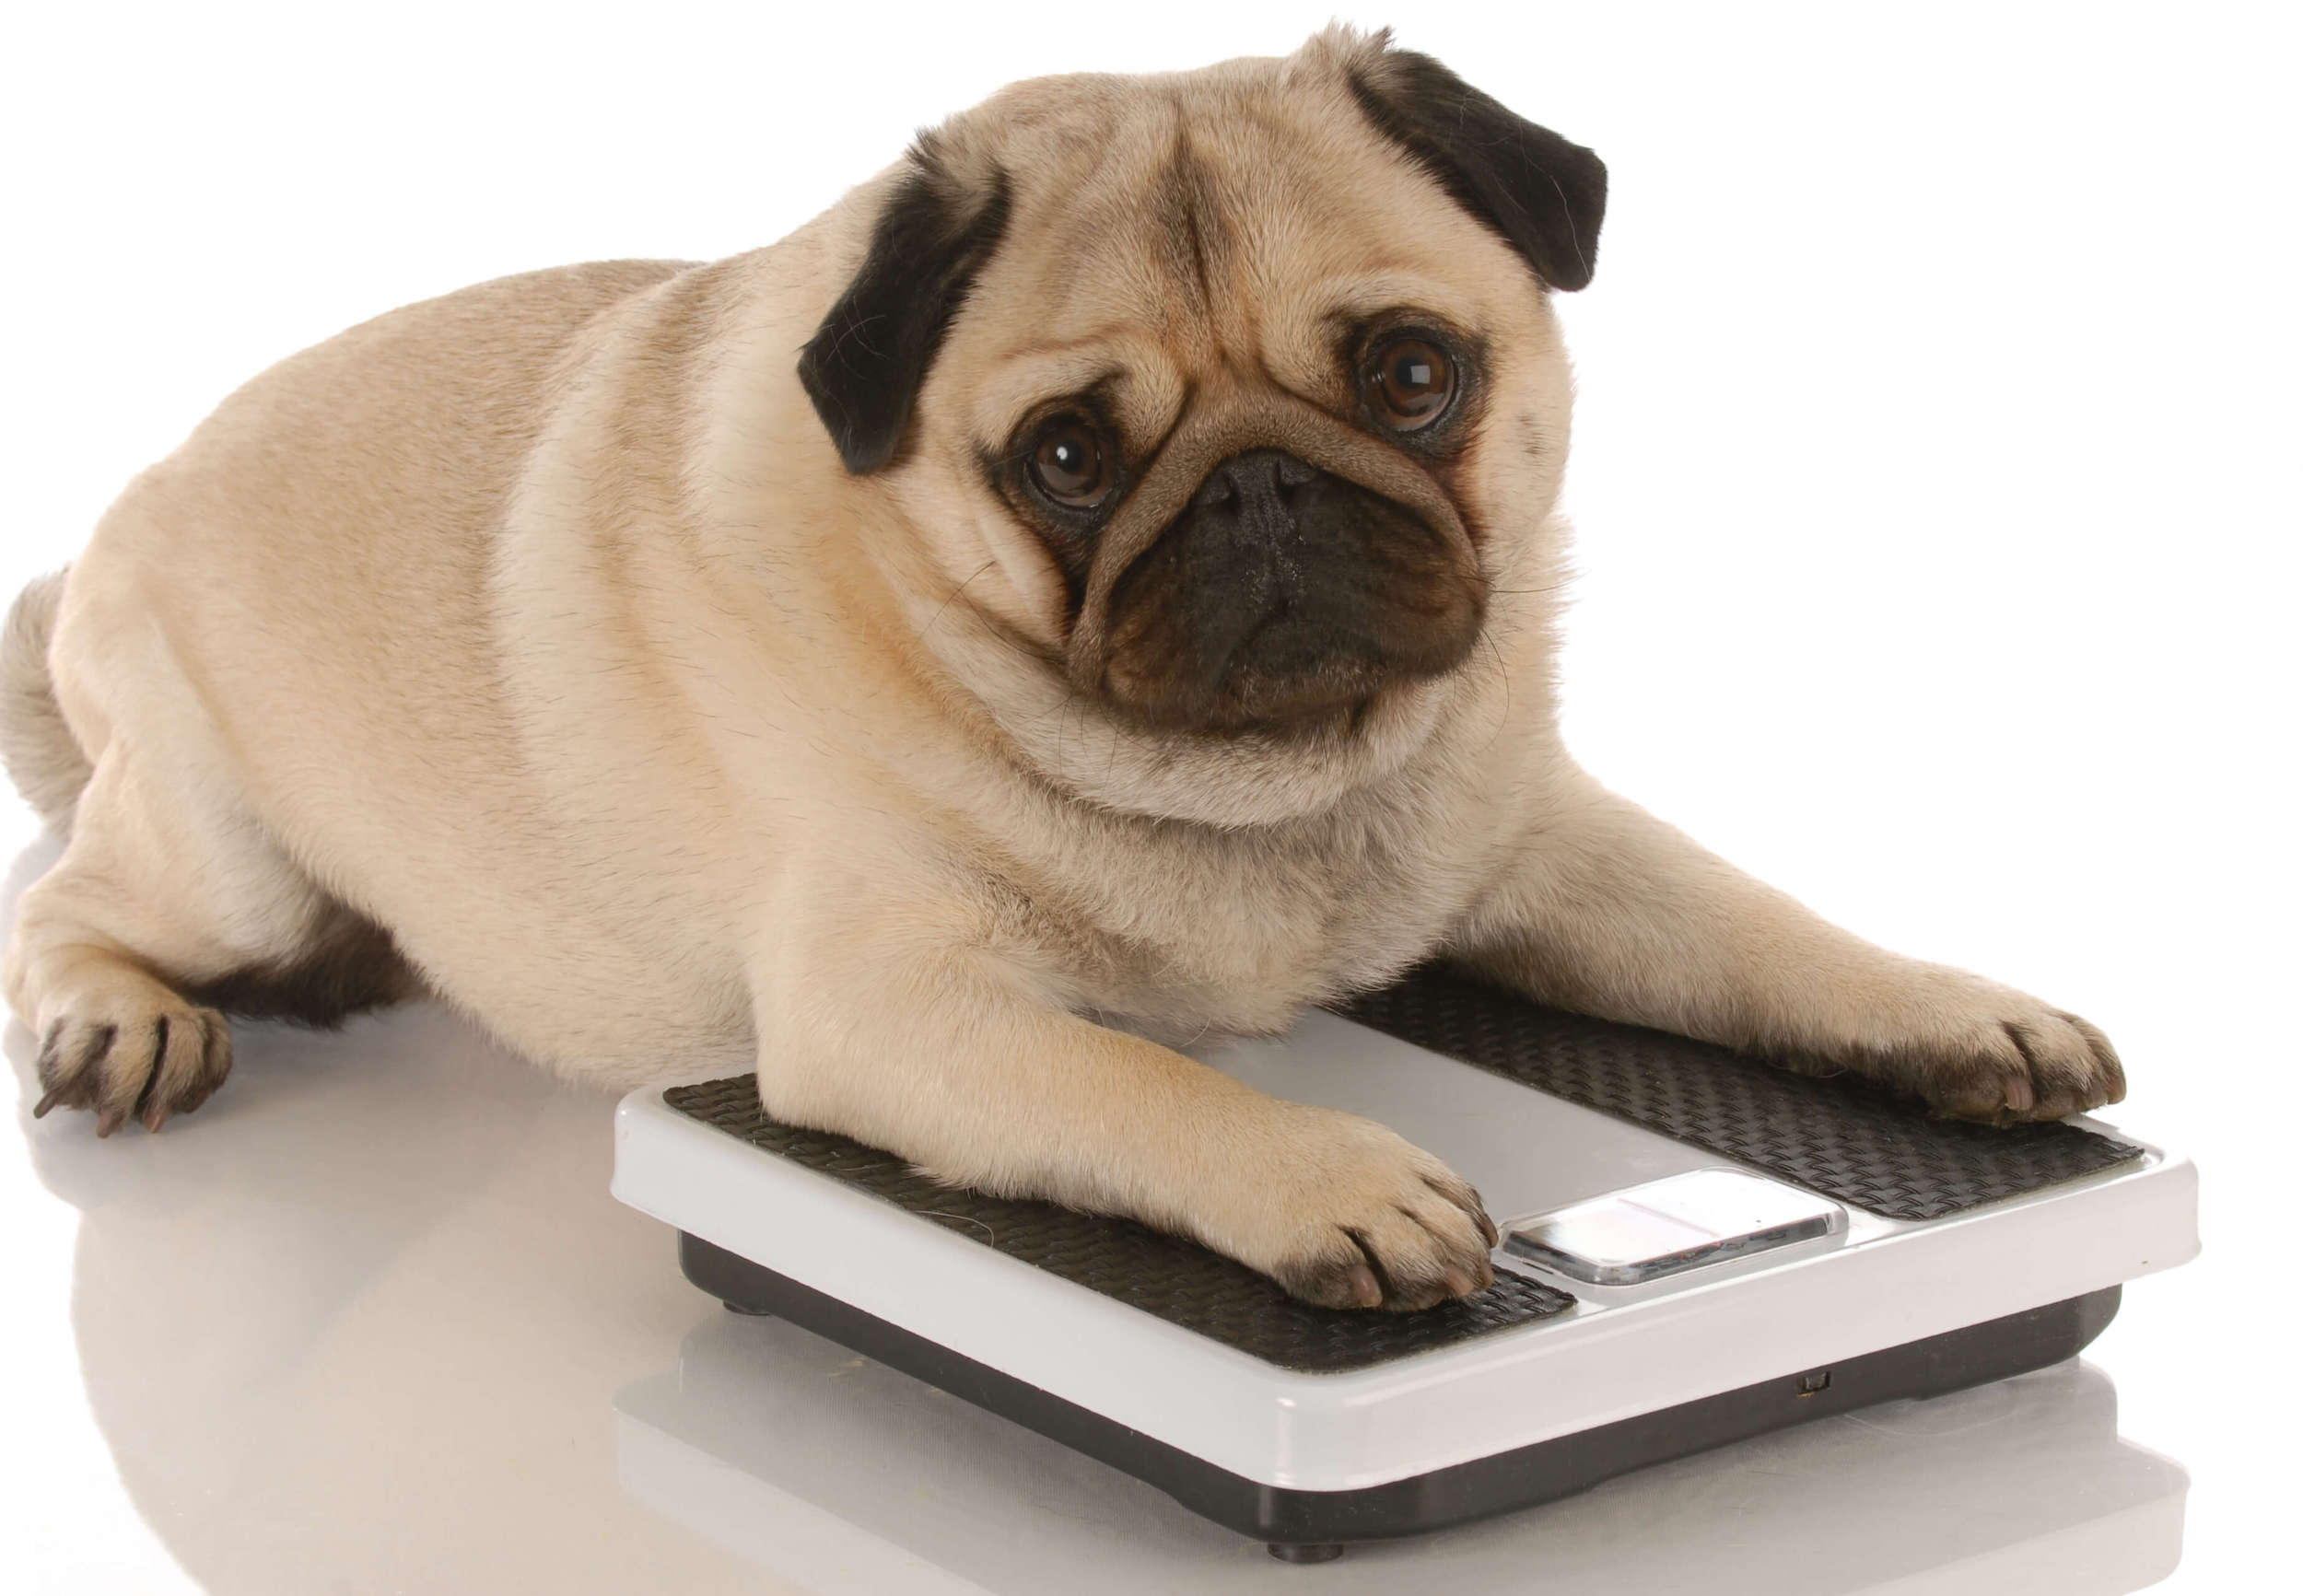 Keeping Your Dog at a Healthy Weight